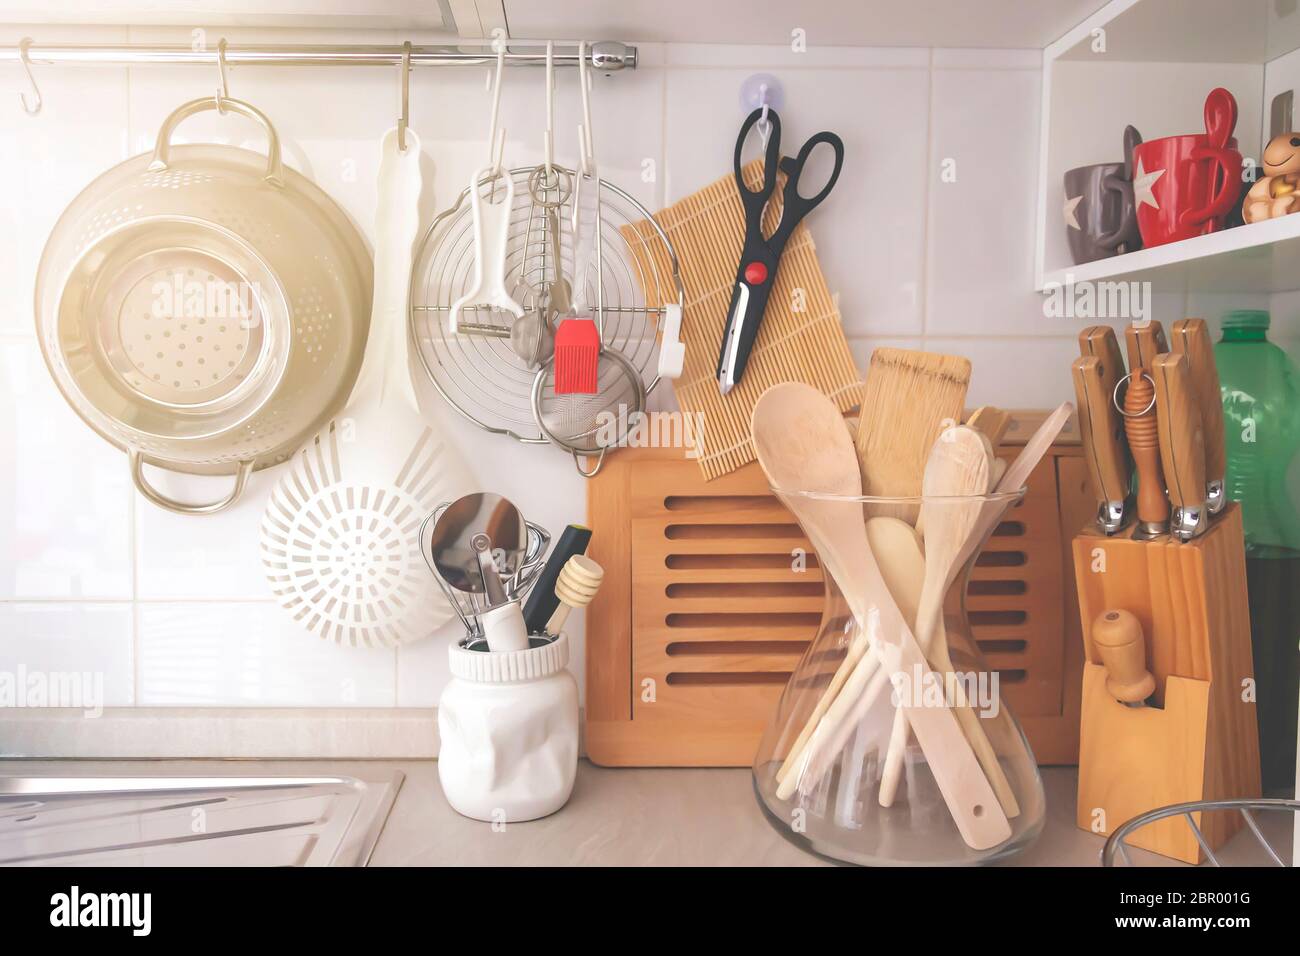 https://c8.alamy.com/comp/2BR001G/kitchen-corner-with-various-cooking-utensils-including-a-colander-knives-and-wooden-utensils-in-a-glass-container-2BR001G.jpg